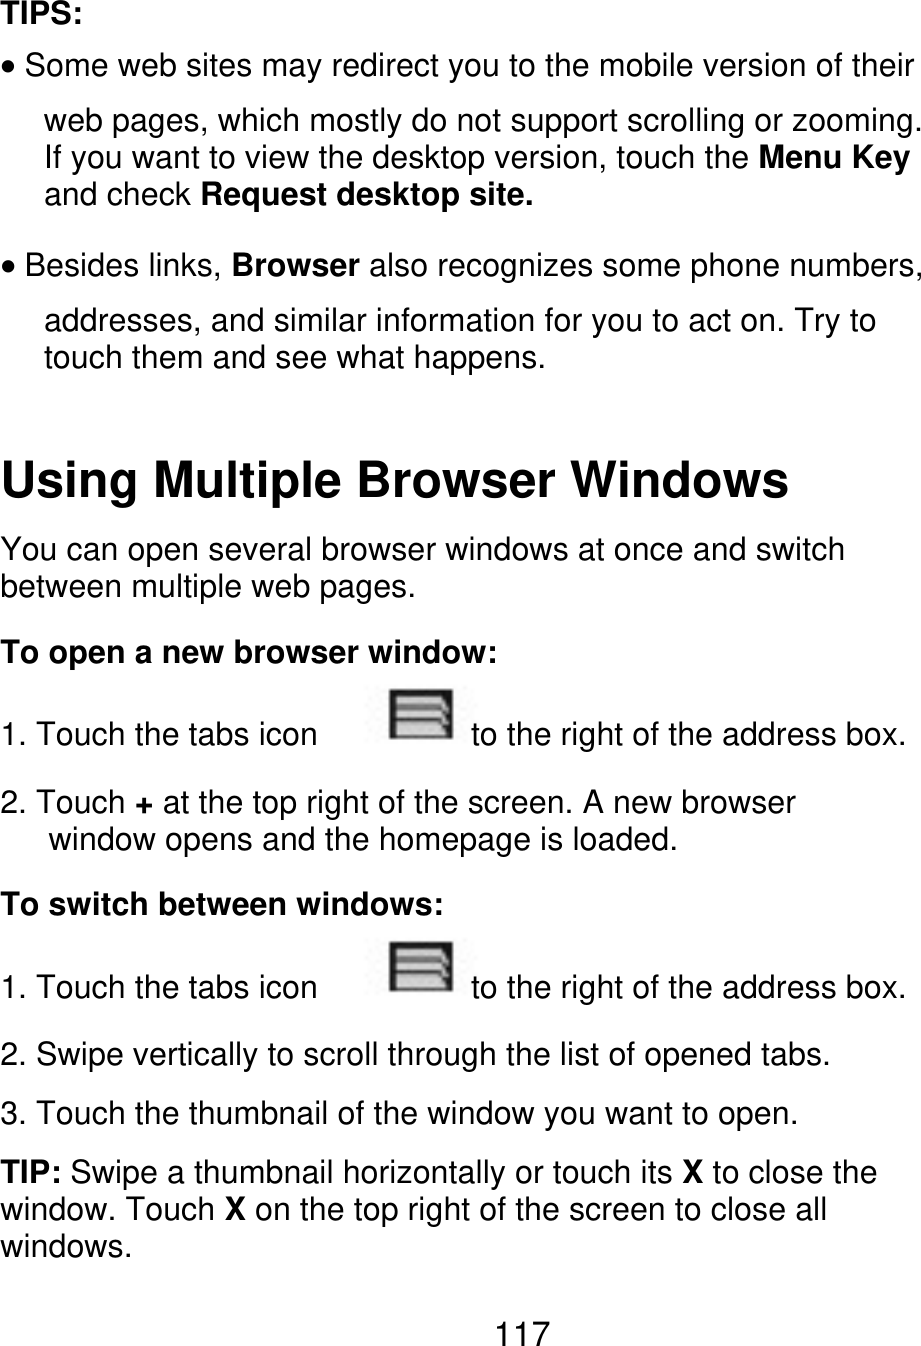 TIPS: Some web sites may redirect you to the mobile version of their web pages, which mostly do not support scrolling or zooming. If you want to view the desktop version, touch the Menu Key and check Request desktop site. Besides links, Browser also recognizes some phone numbers, addresses, and similar information for you to act on. Try to touch them and see what happens. Using Multiple Browser Windows You can open several browser windows at once and switch between multiple web pages. To open a new browser window: 1. Touch the tabs icon to the right of the address box. 2. Touch + at the top right of the screen. A new browser       window opens and the homepage is loaded. To switch between windows: 1. Touch the tabs icon to the right of the address box. 2. Swipe vertically to scroll through the list of opened tabs. 3. Touch the thumbnail of the window you want to open. TIP: Swipe a thumbnail horizontally or touch its X to close the window. Touch X on the top right of the screen to close all windows. 117 